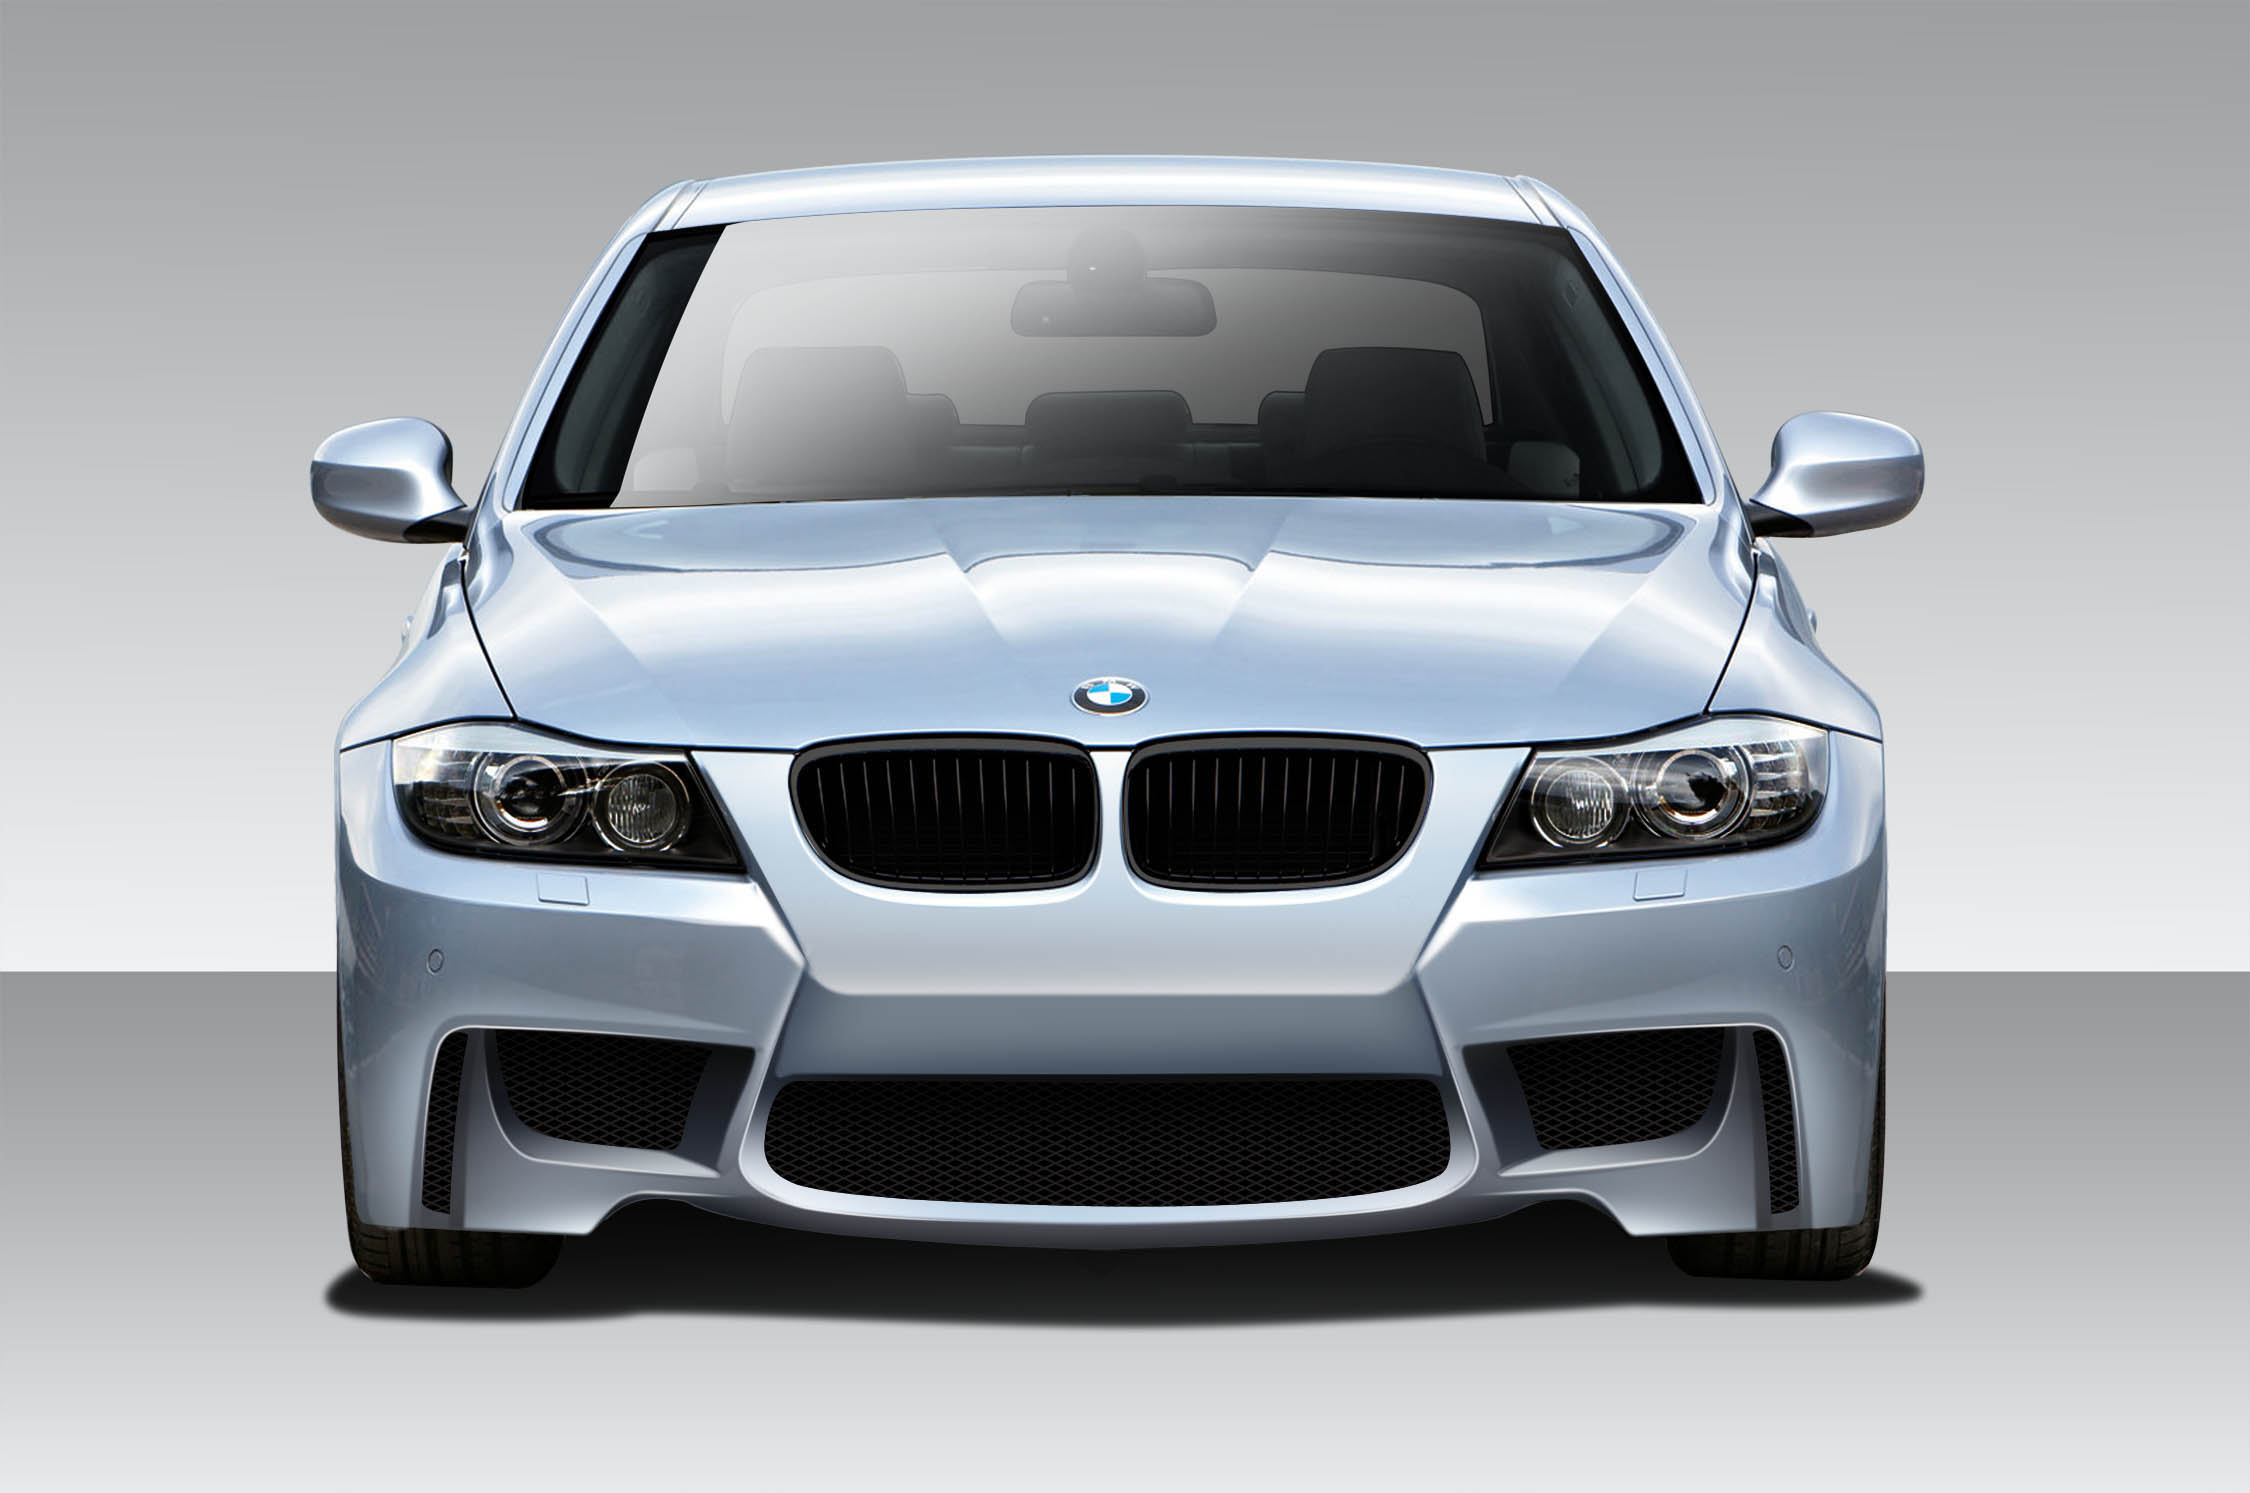 1m Look Front Bumper For Your Bmw Special Pre Order Pricing 6speedonline Porsche Forum And 